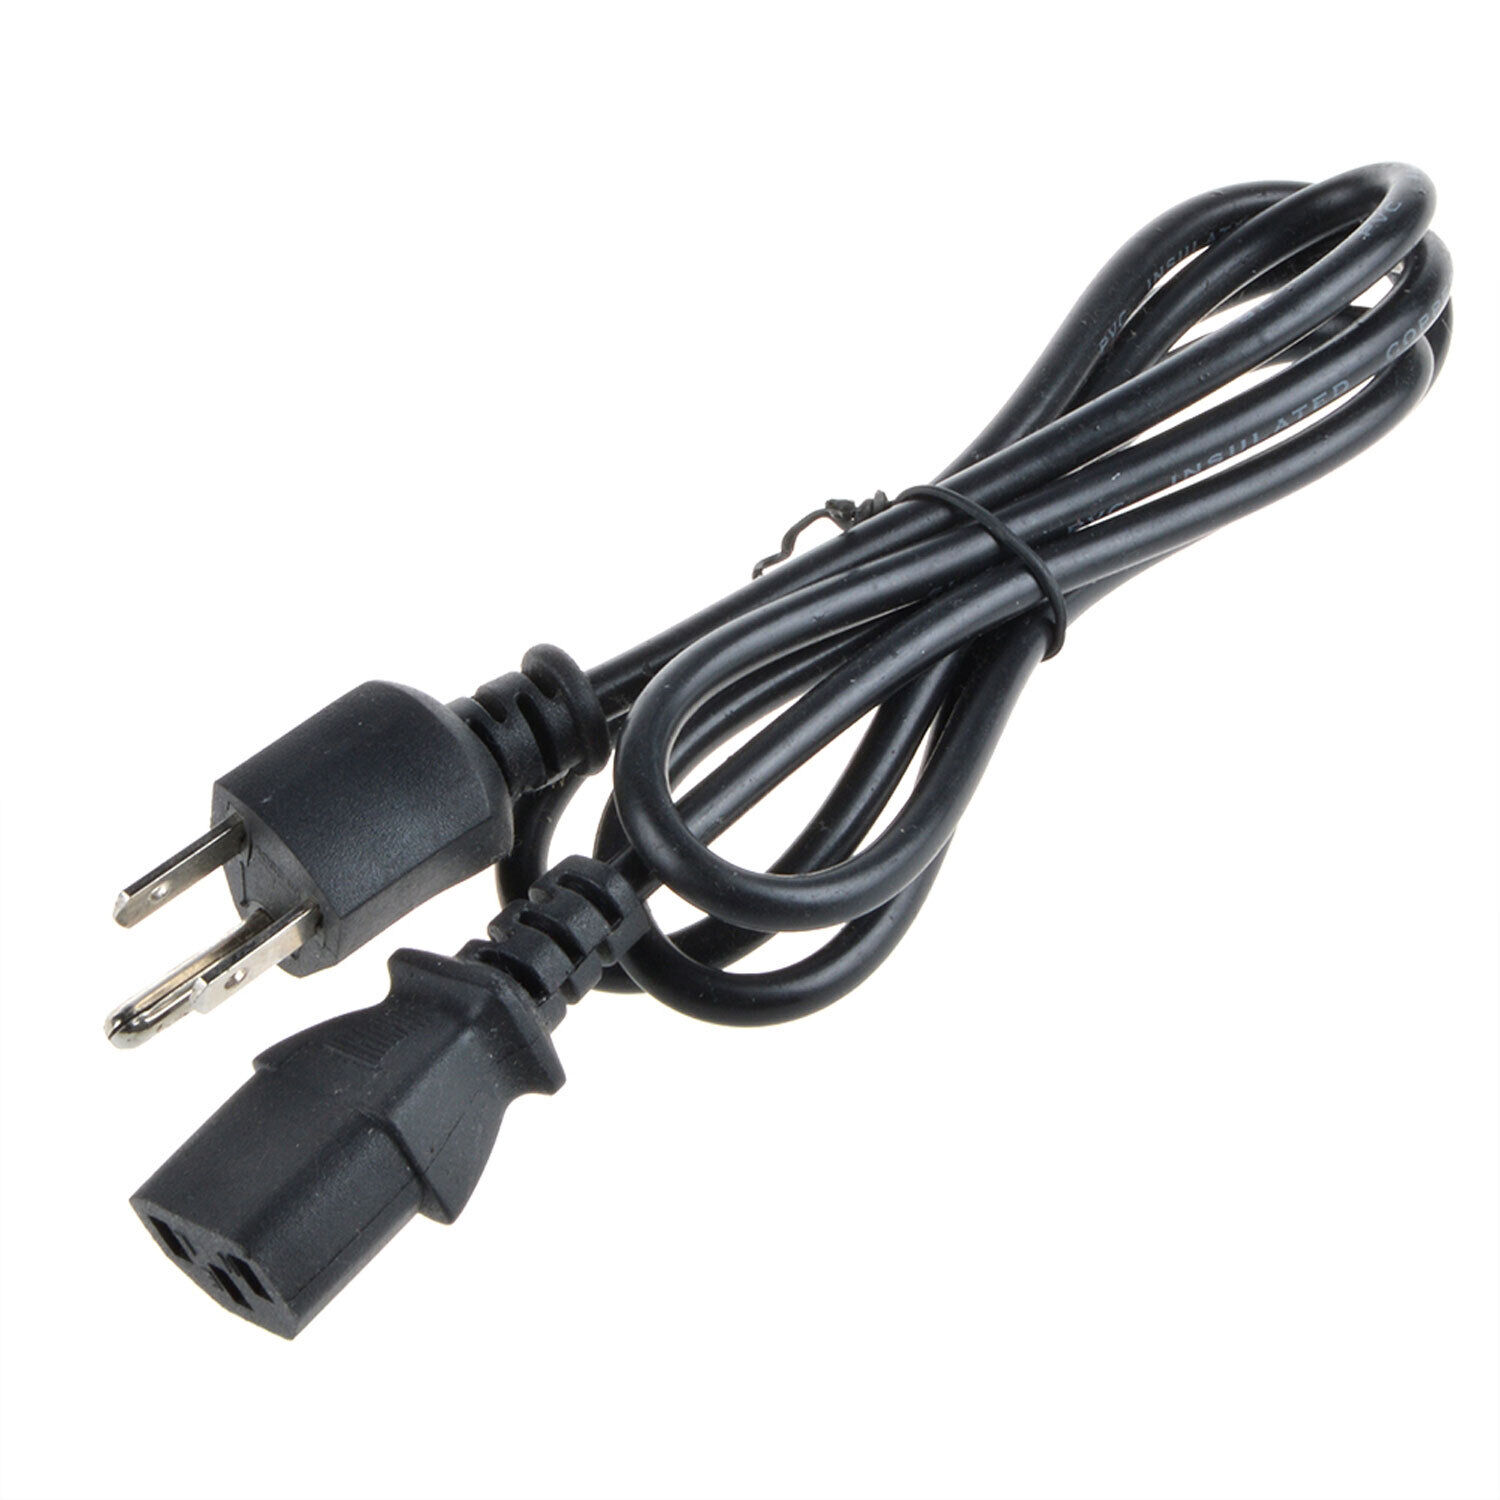 PwrON 5FT AC Power Cord Cable for Lenovo IdeaCentre 510A computer PC tower